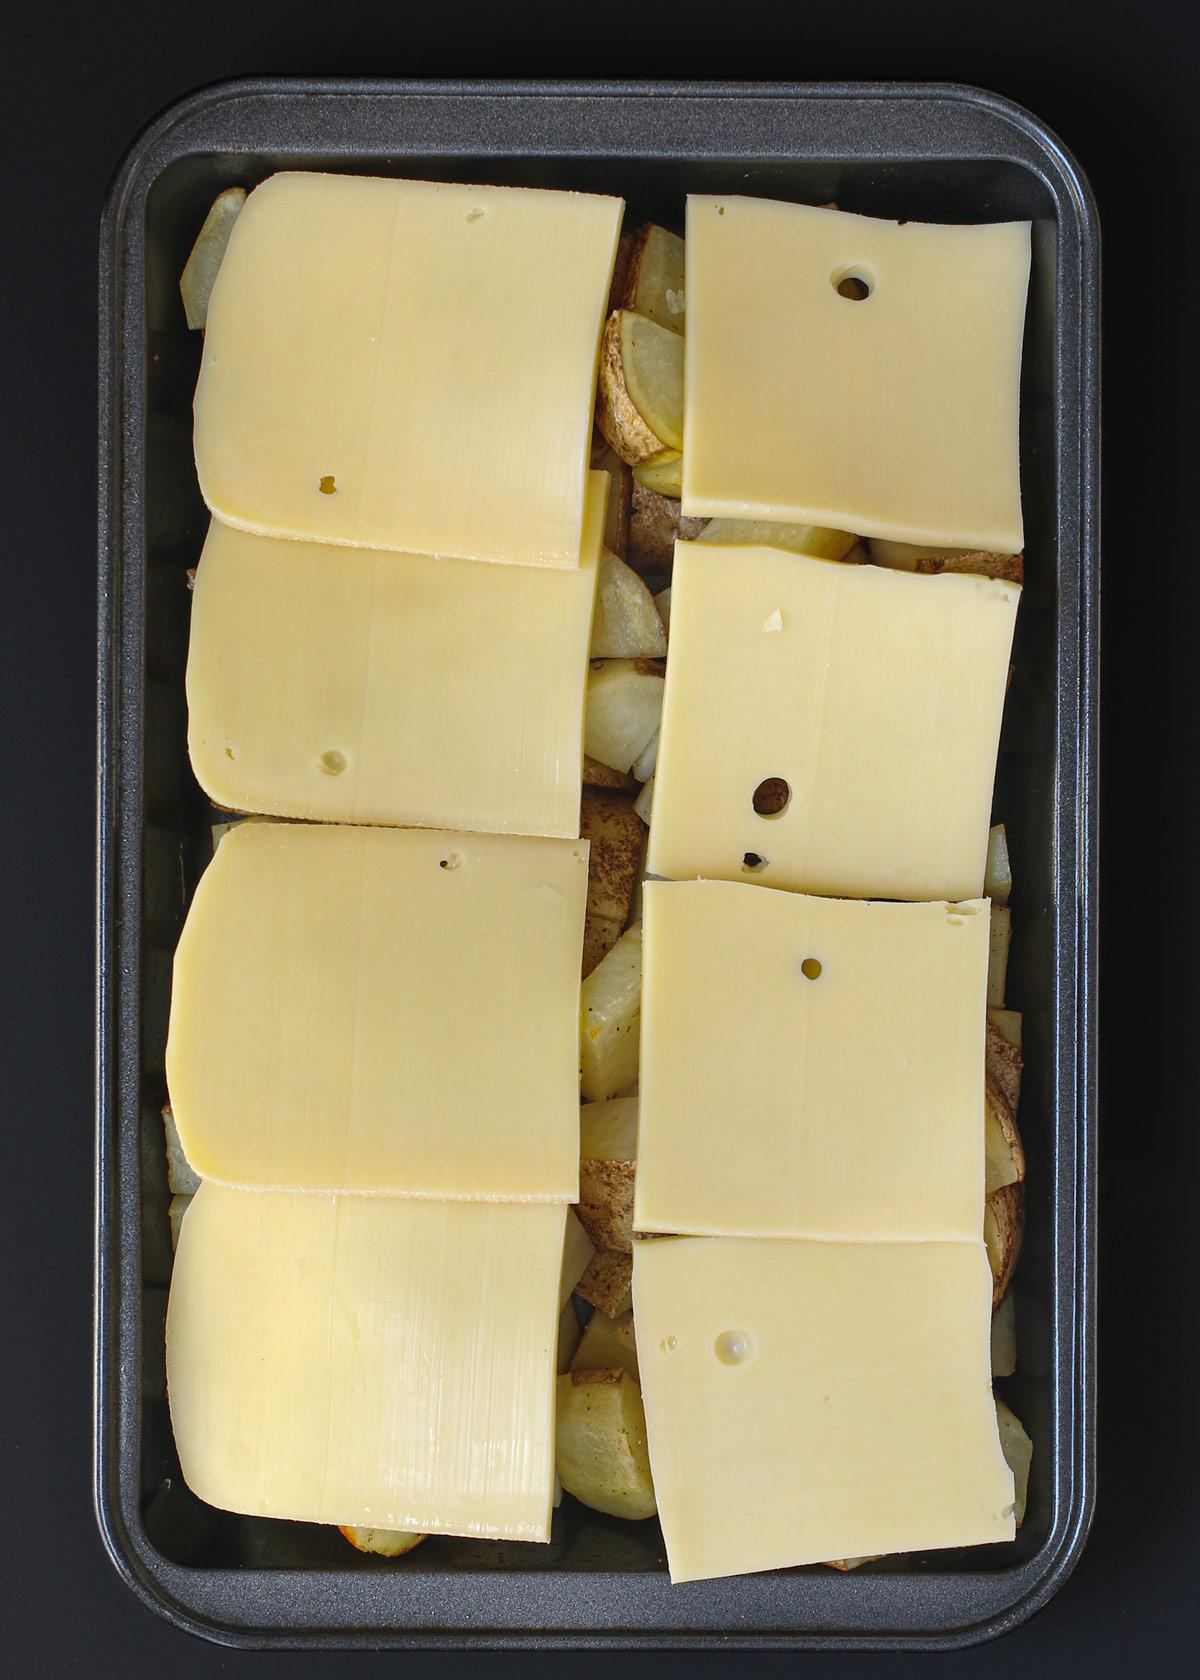 raclette slices layered over the cooked potatoes.